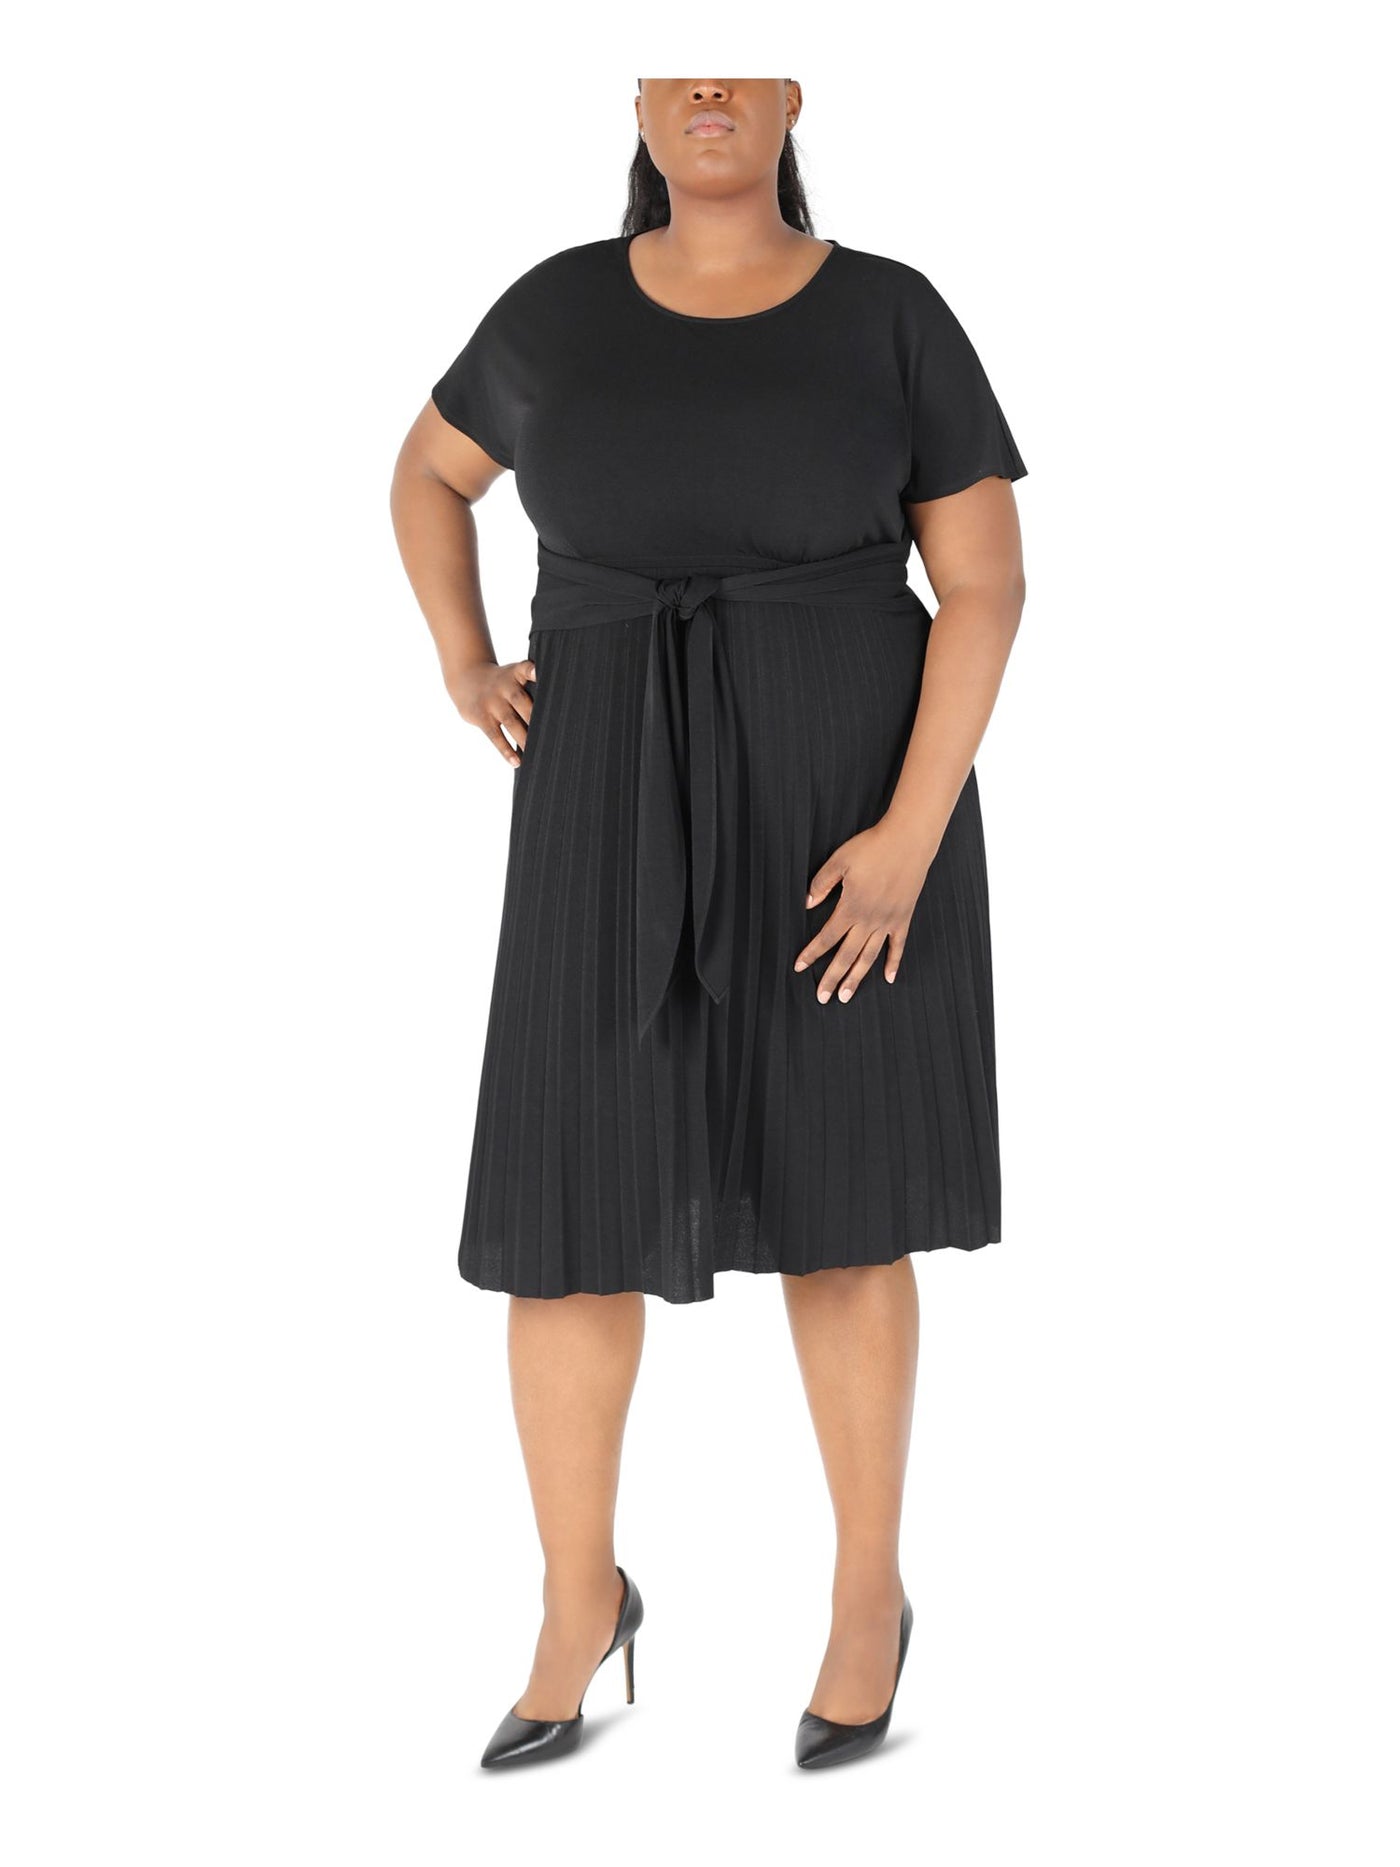 ROBBIE BEE Womens Black Jersey Pleated Tie Pullover Style Unlined Short Sleeve Round Neck Below The Knee Fit + Flare Dress 3X